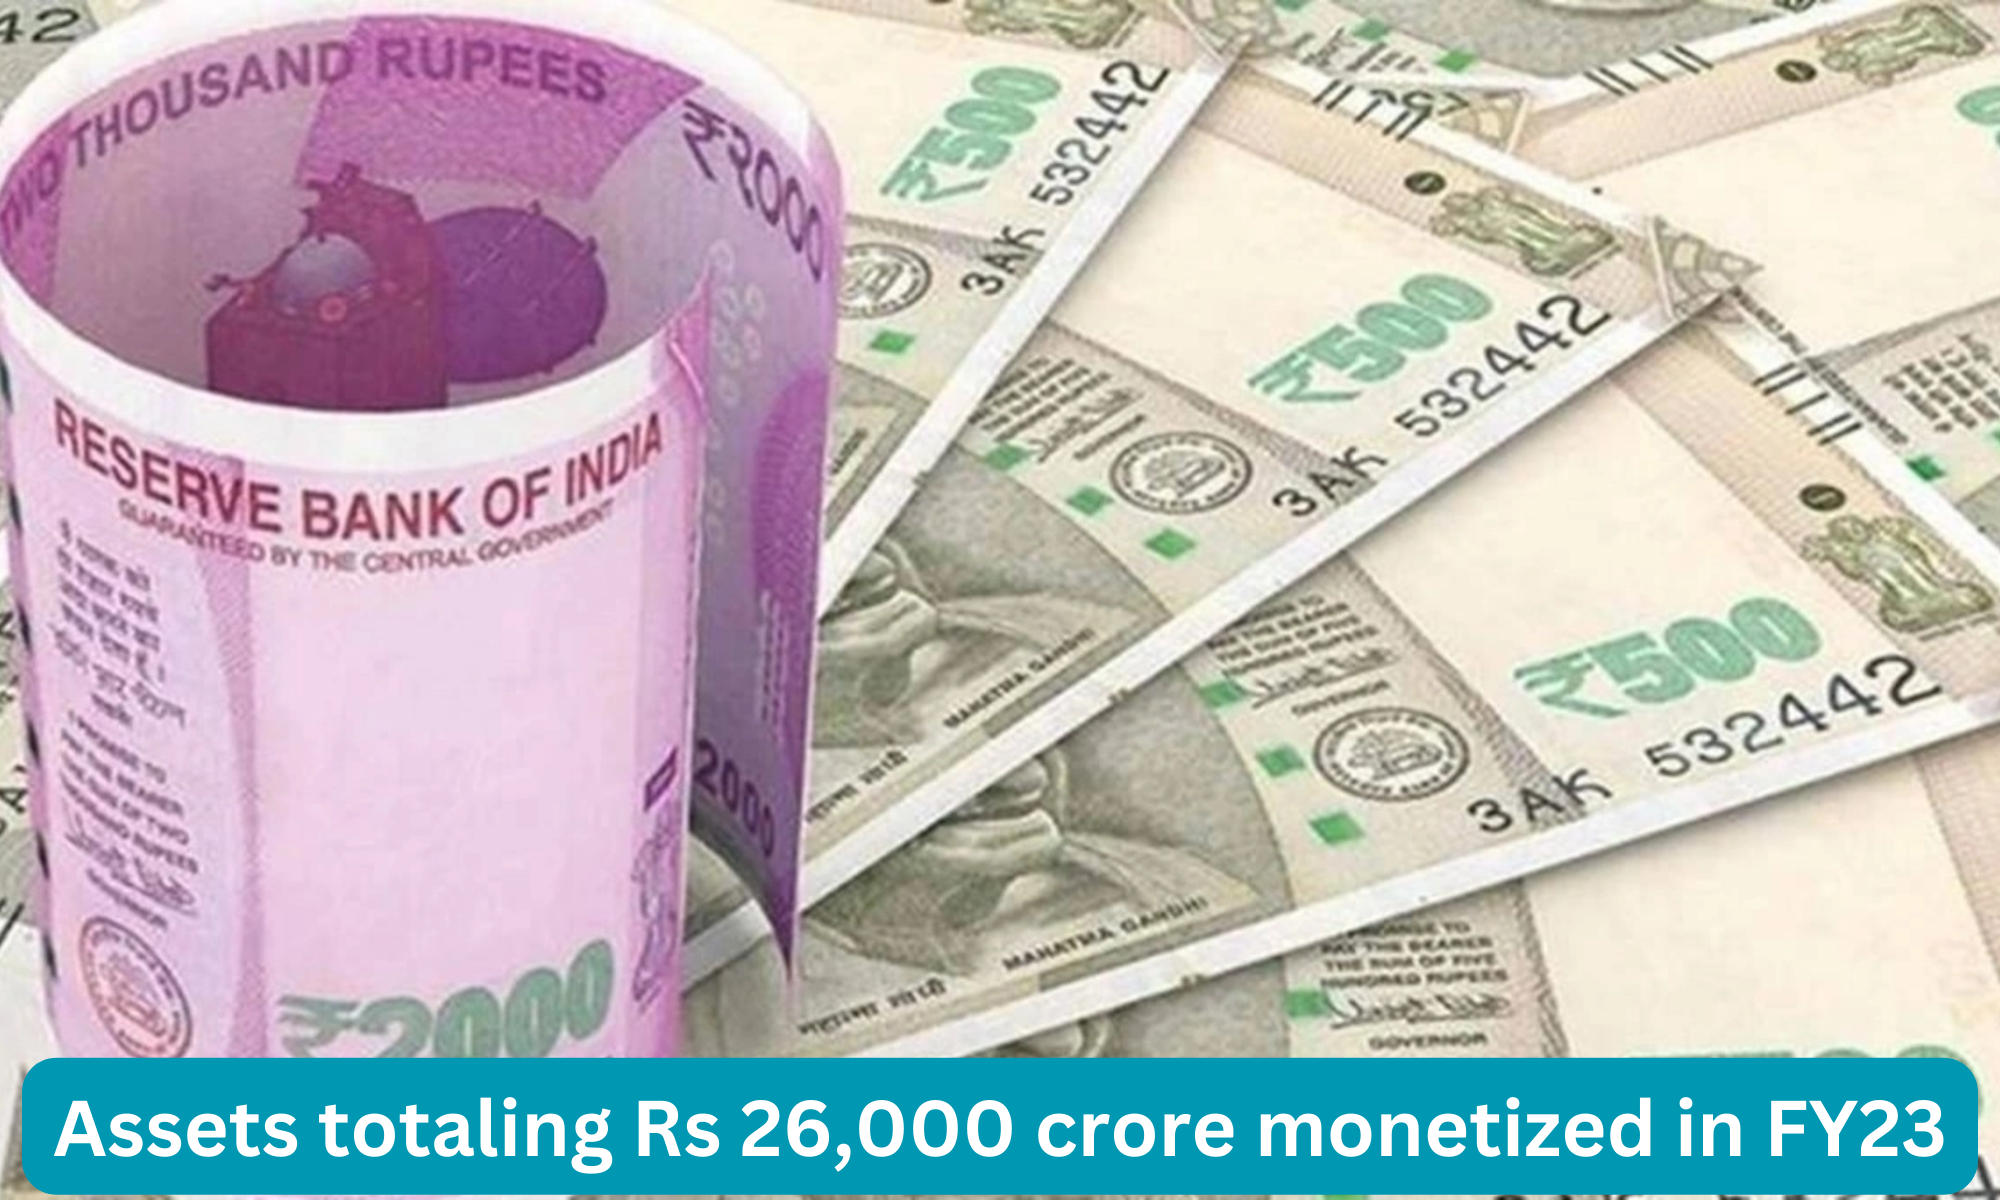 Assets totaling Rs 26,000 crore monetized in FY23